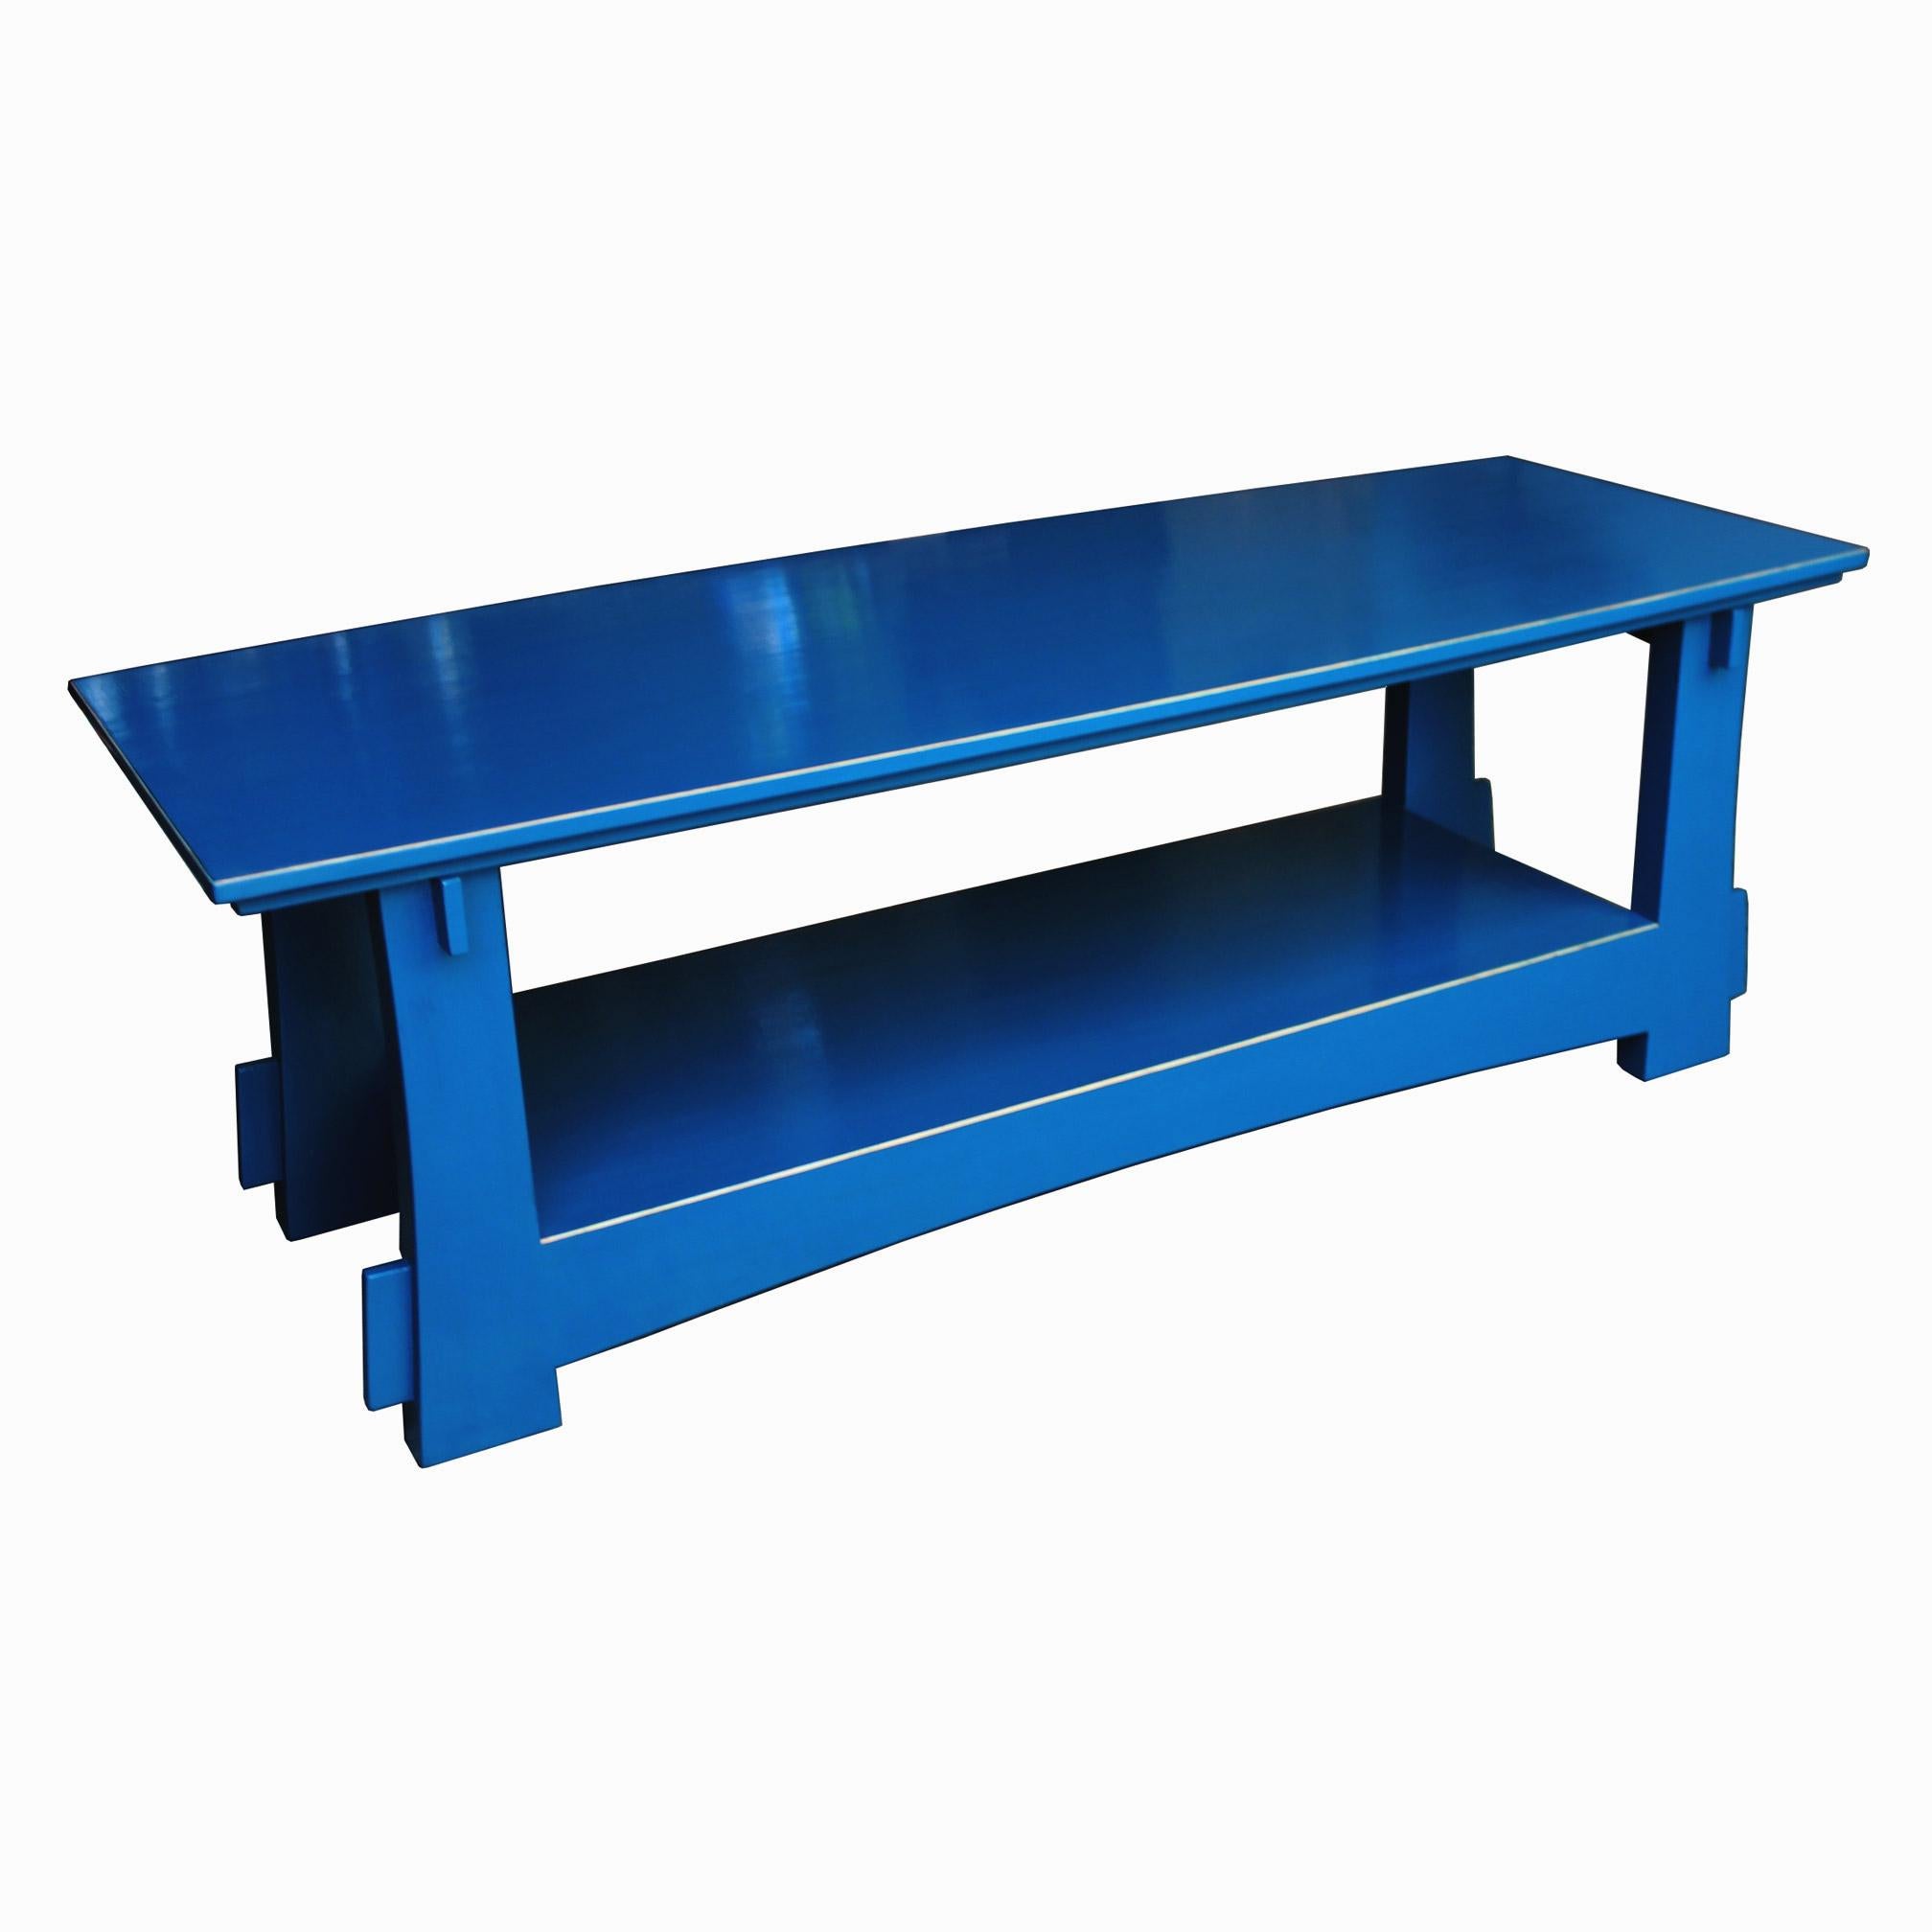 Custom handcrafted blue lacquer rectangular coffee table with shelf. Place in front of a couch with books and accessories on top.